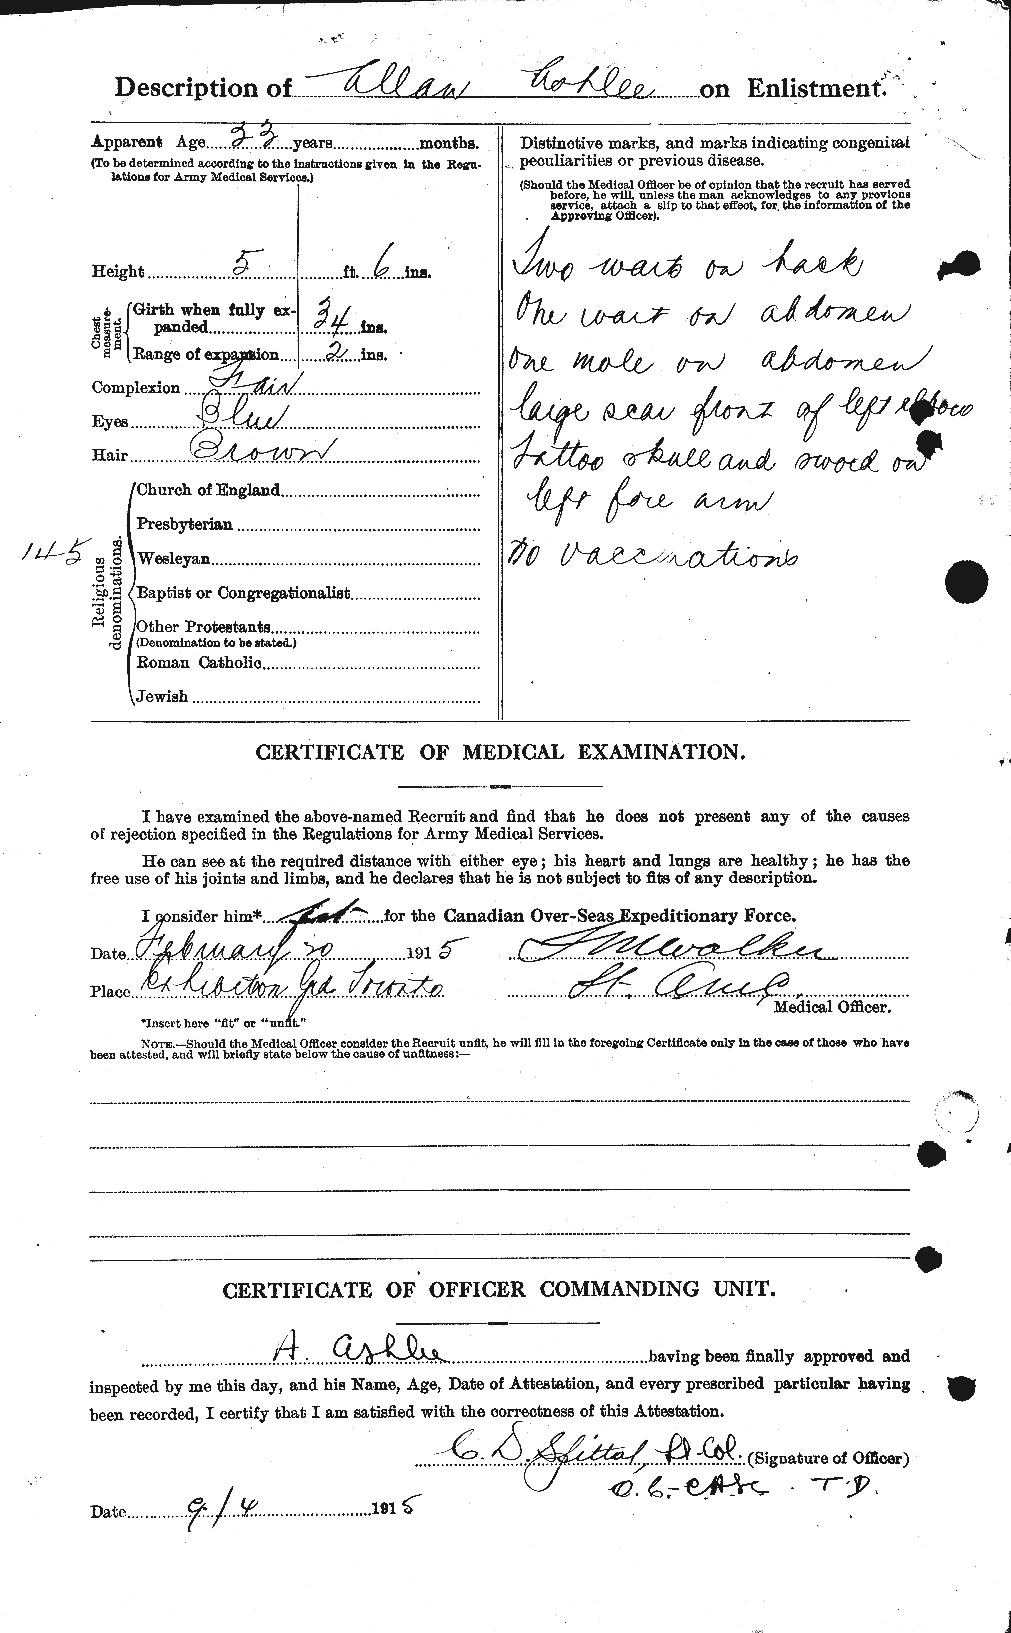 Personnel Records of the First World War - CEF 223228b